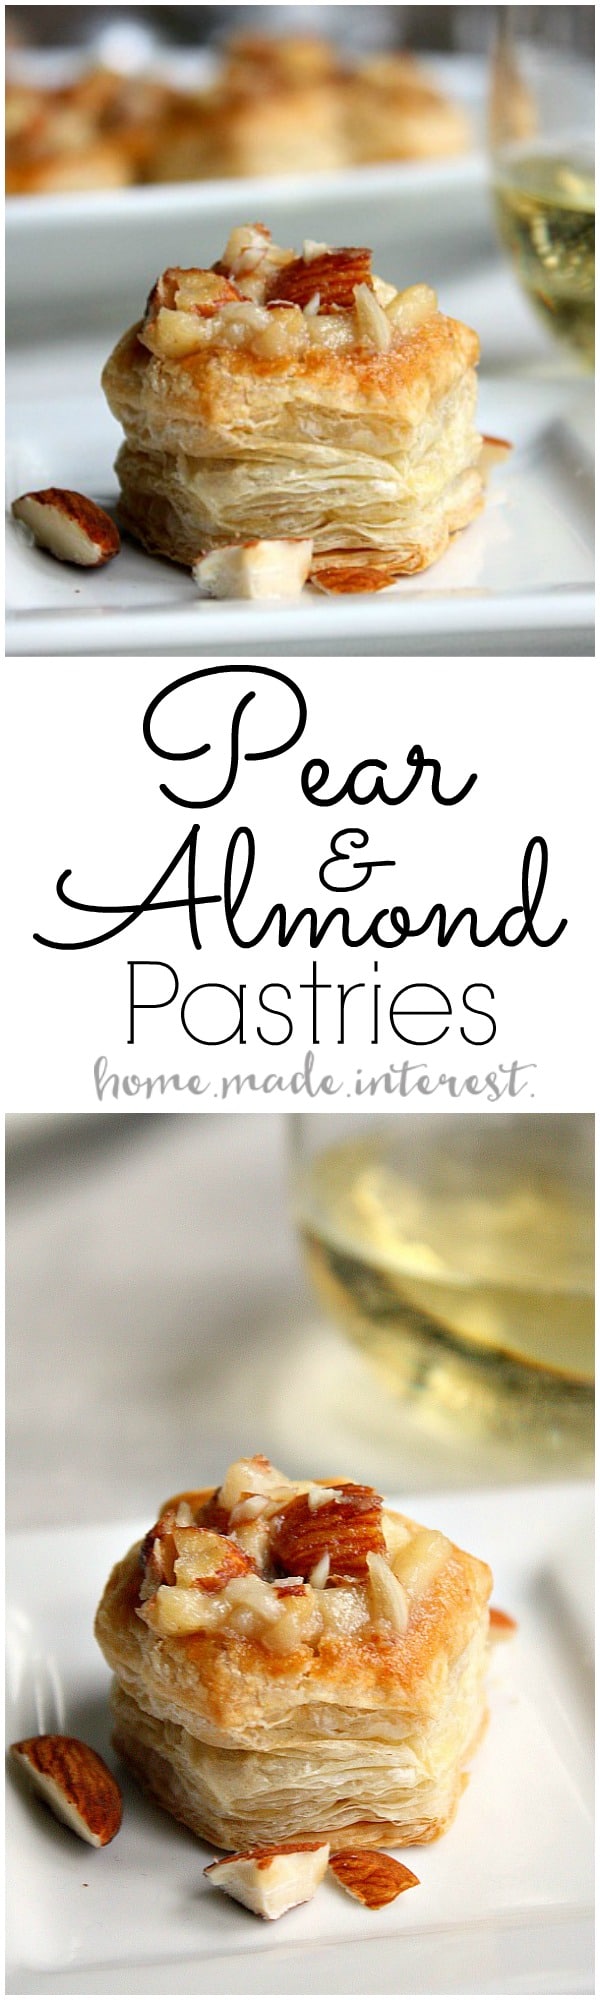 Our Wine Pairing Party was all about trying new foods and tasting new wines. These Pear and Almond Pastries paired with white wine perfectly! They were an easy bite size dessert that everyone loved!